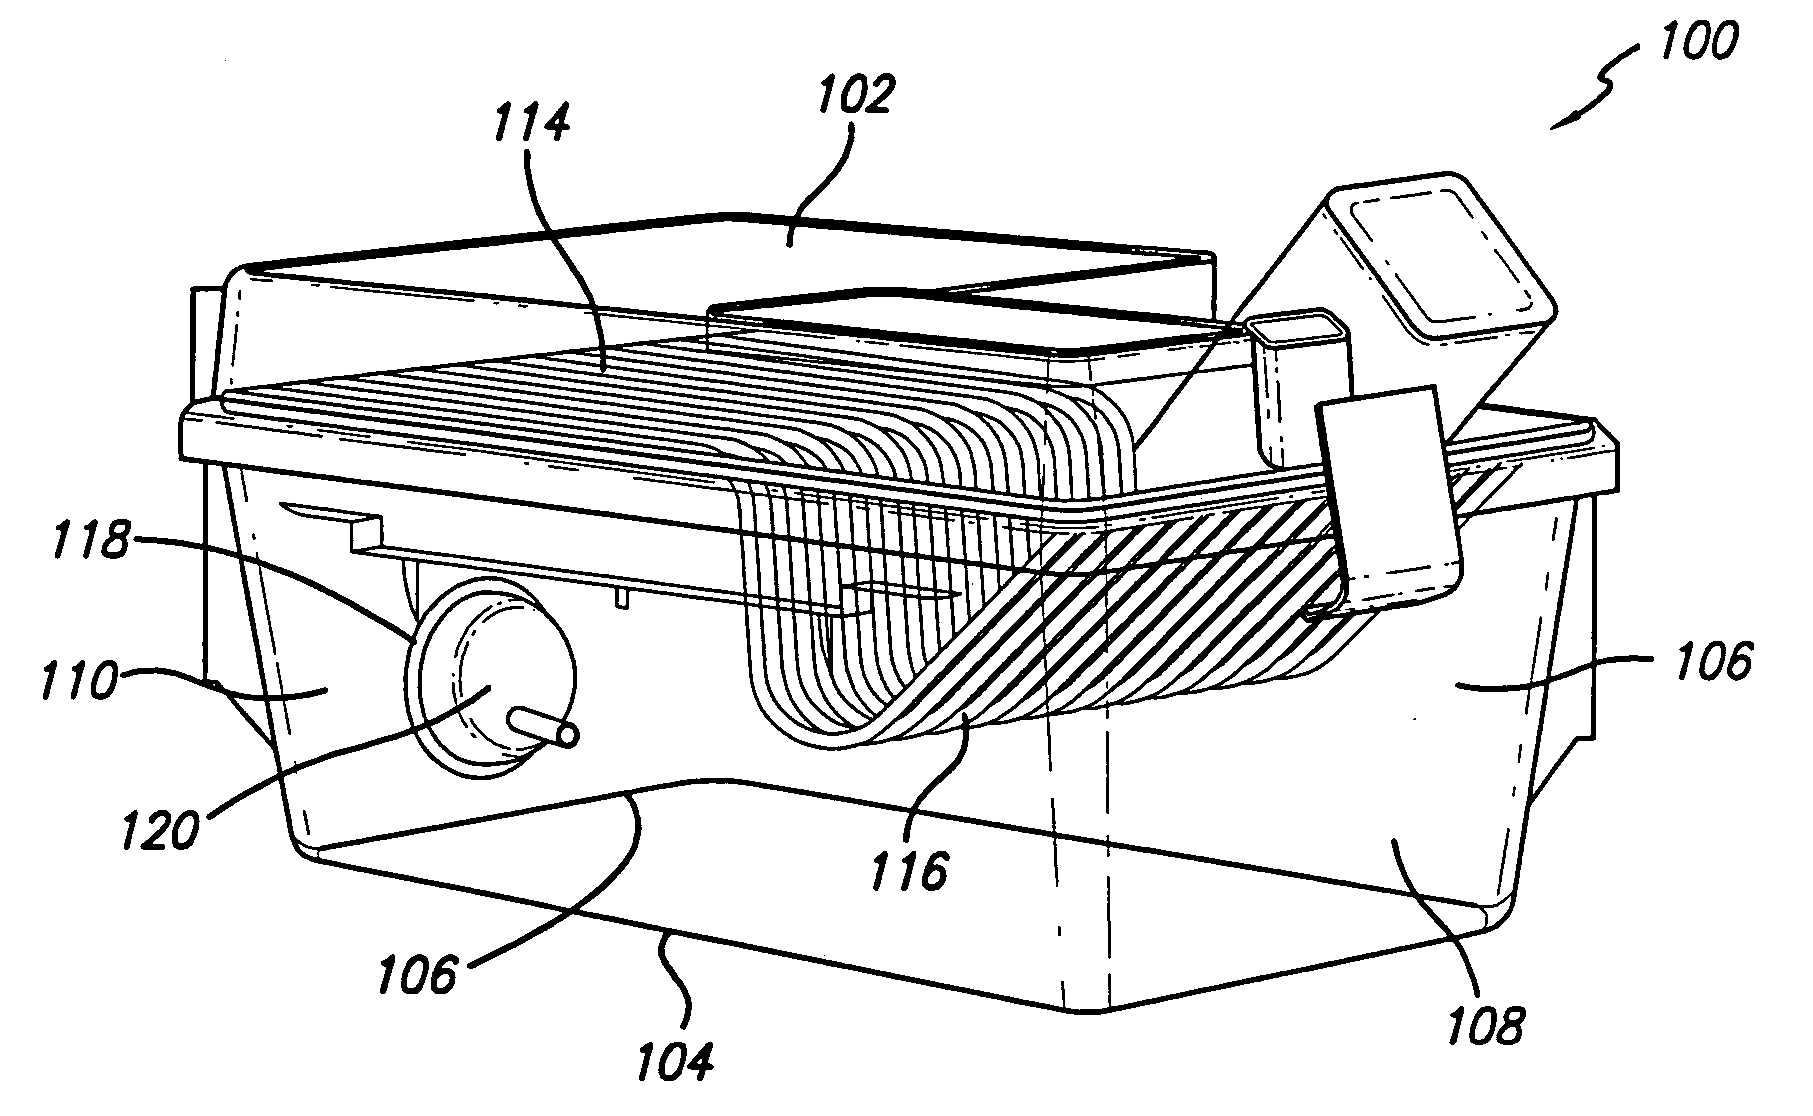 Rodent cage to accommodate monitoring devices